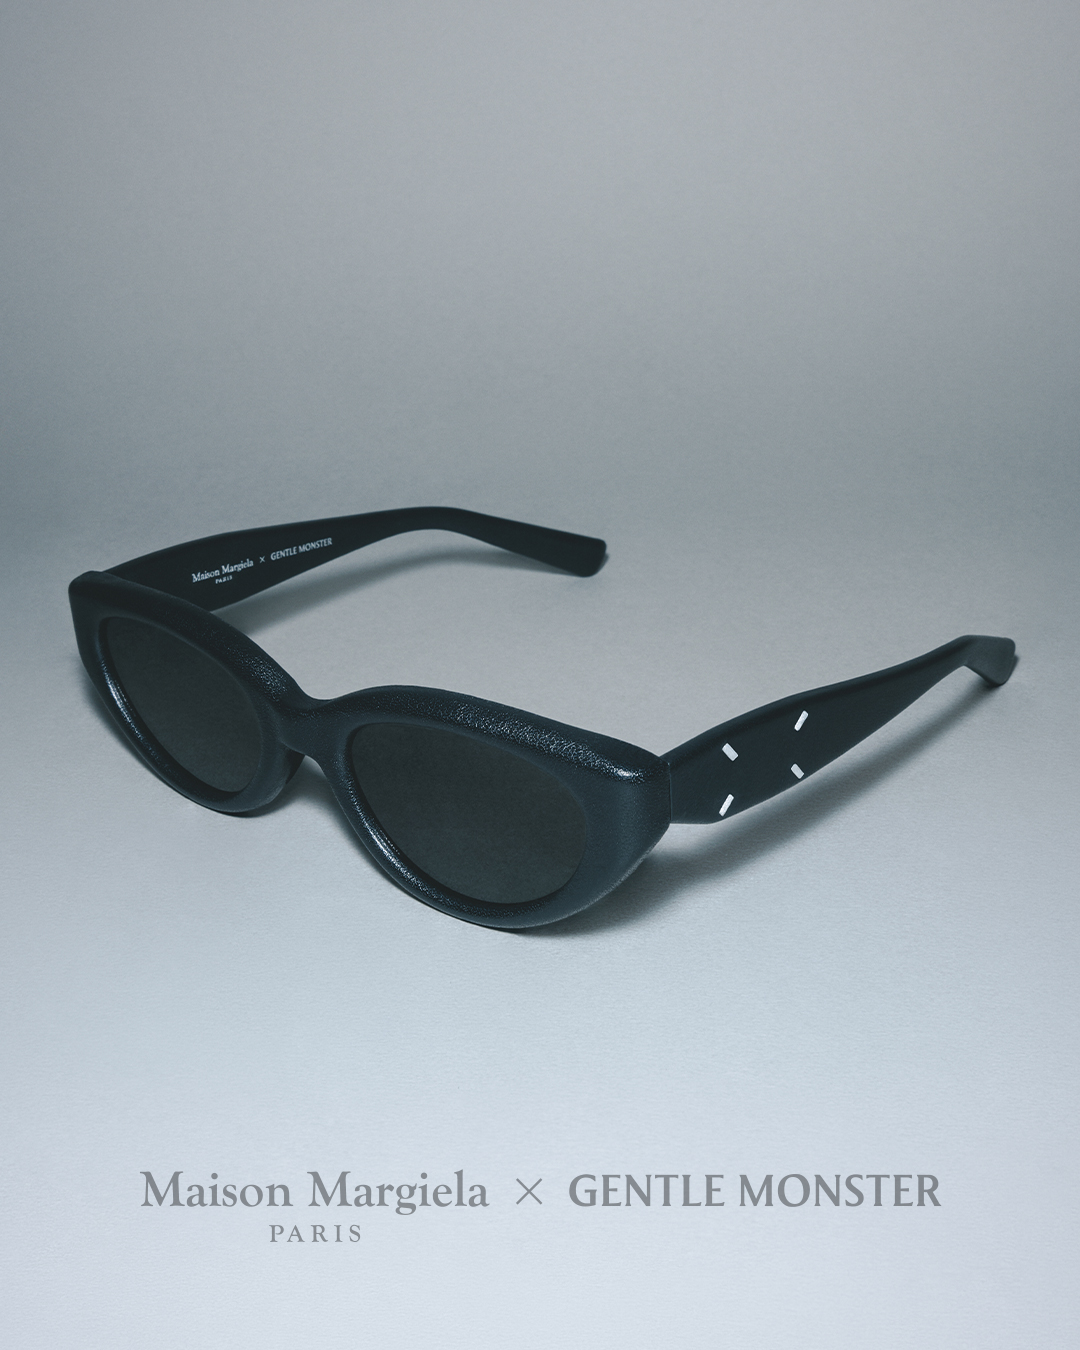 A pair of Maison Margiela x GENTLE MONSTER black sunglasses with distinctive leather-wrapped frames and four white stitches on the arm, resting on a grey background with their brand collaboration name displayed below.